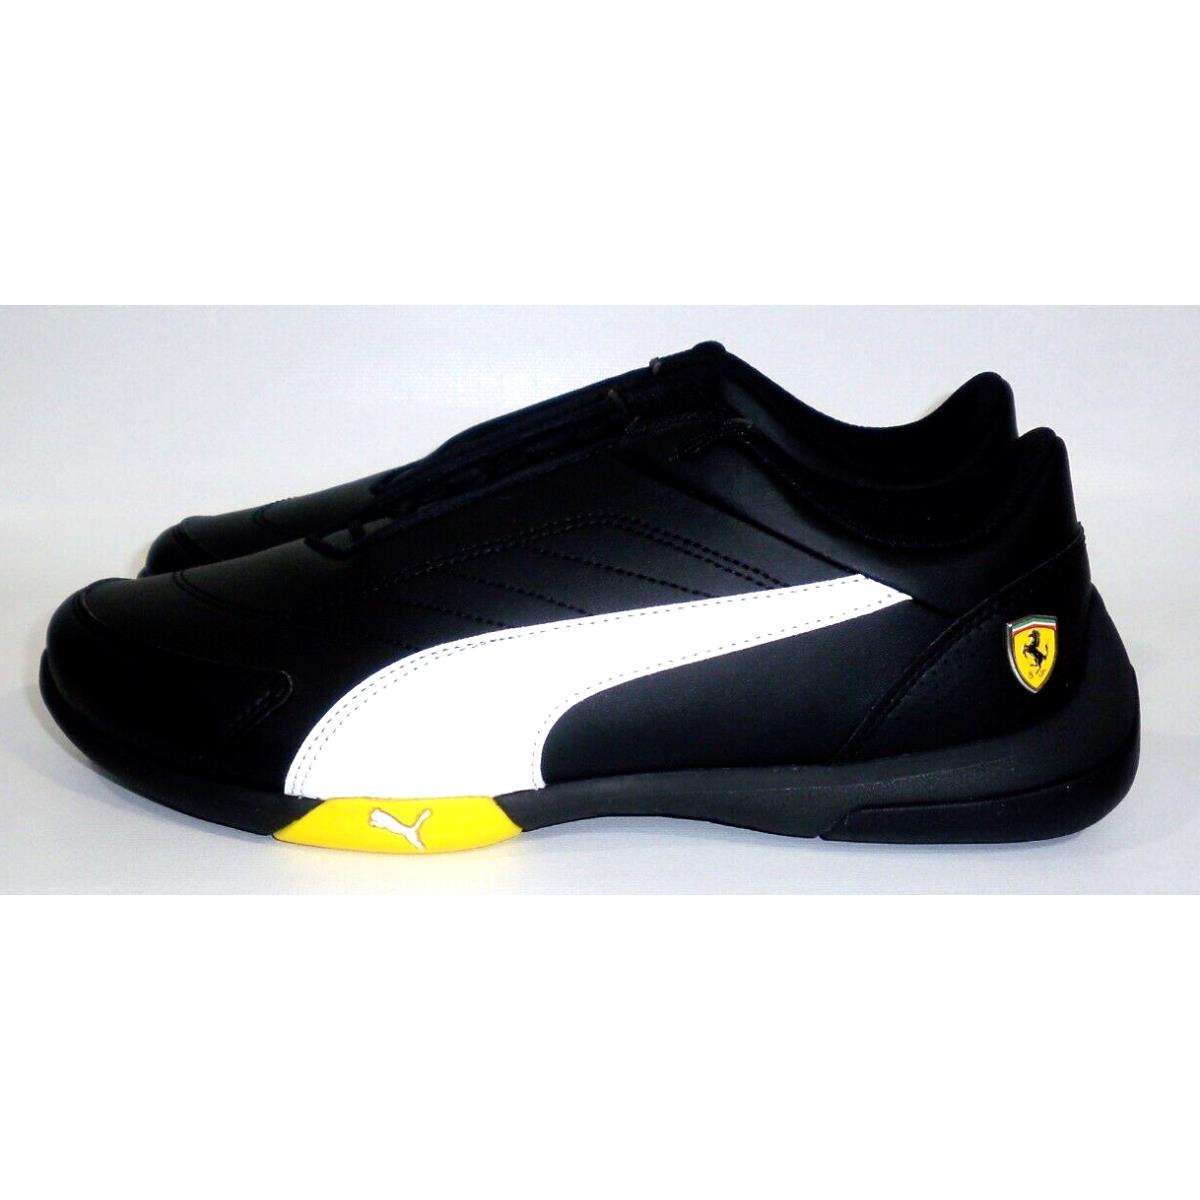 Puma shoes  - Black , Black, White, and Blazing Yellow Manufacturer 12